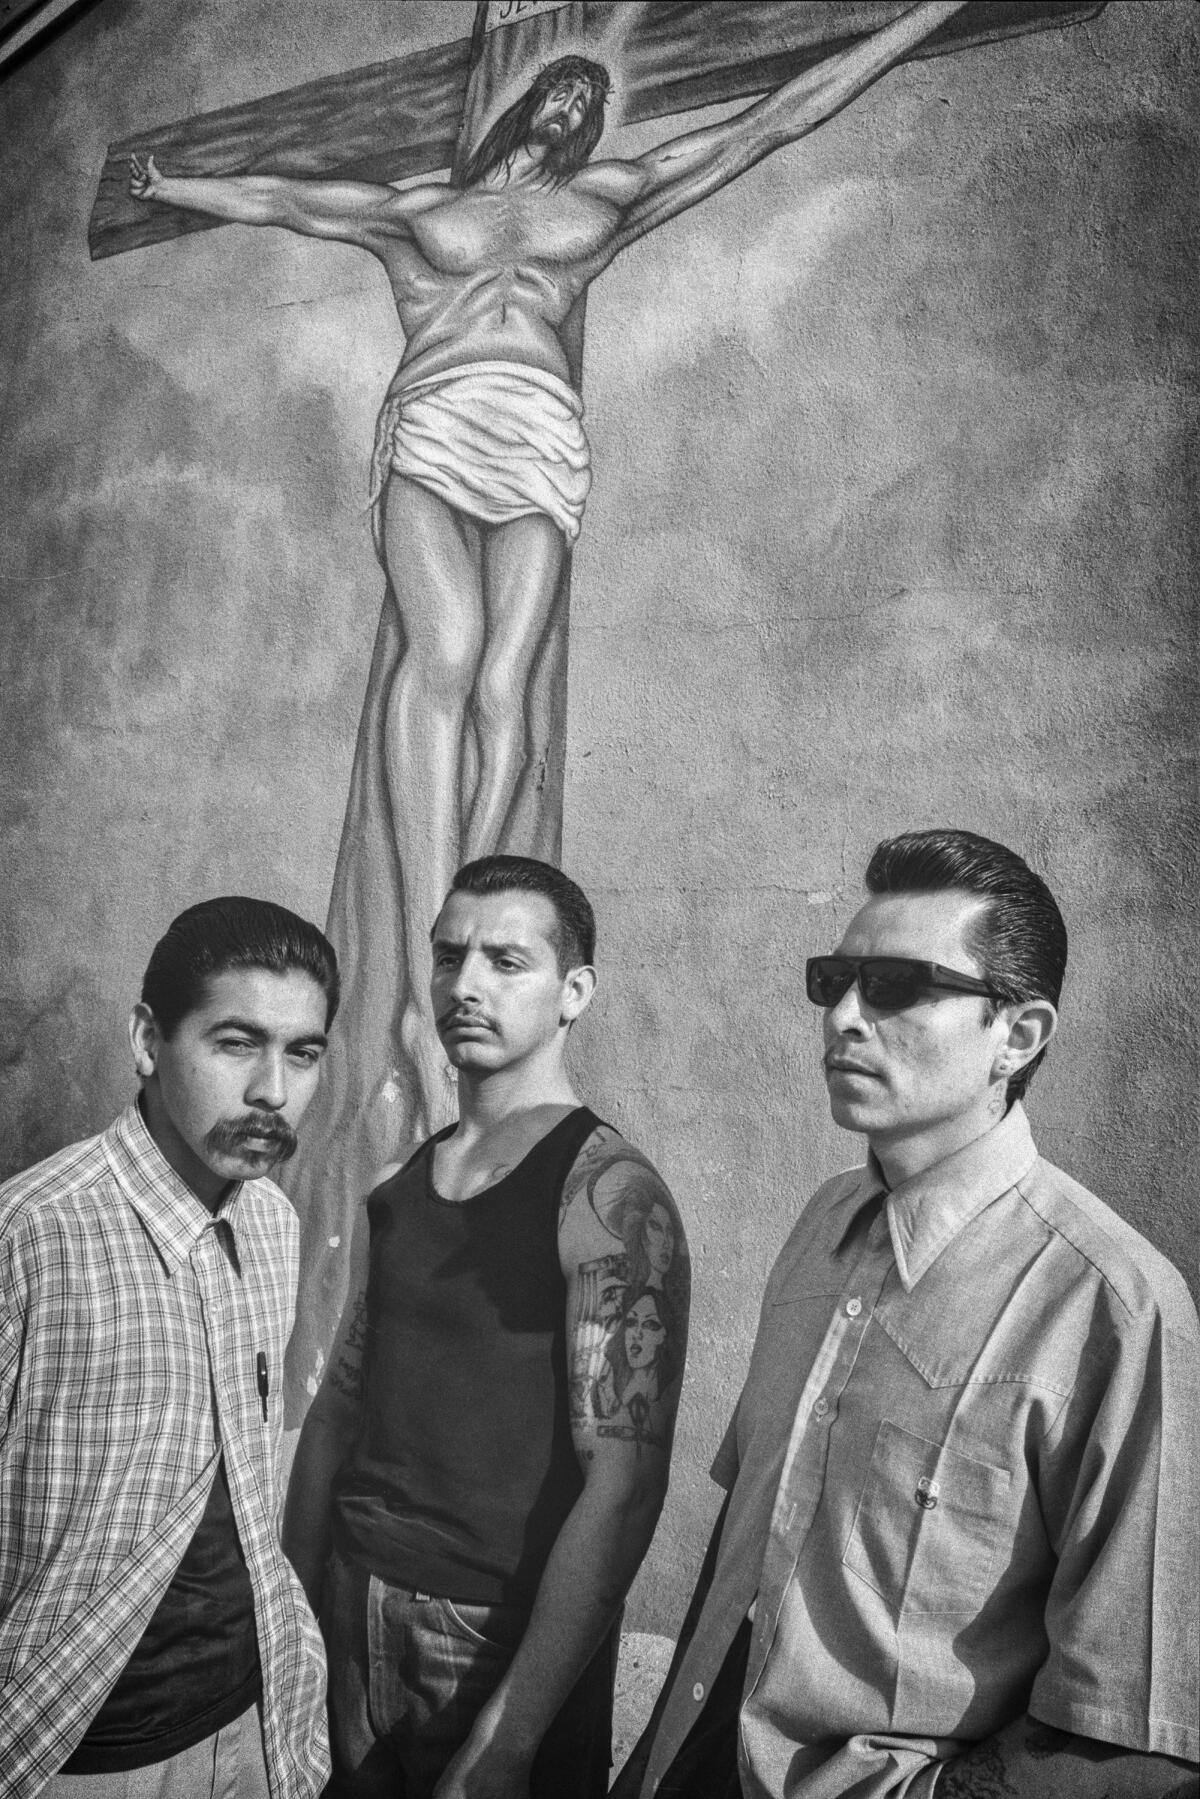 Three young men stand together in front of a mural of the crucifixion of Jesus